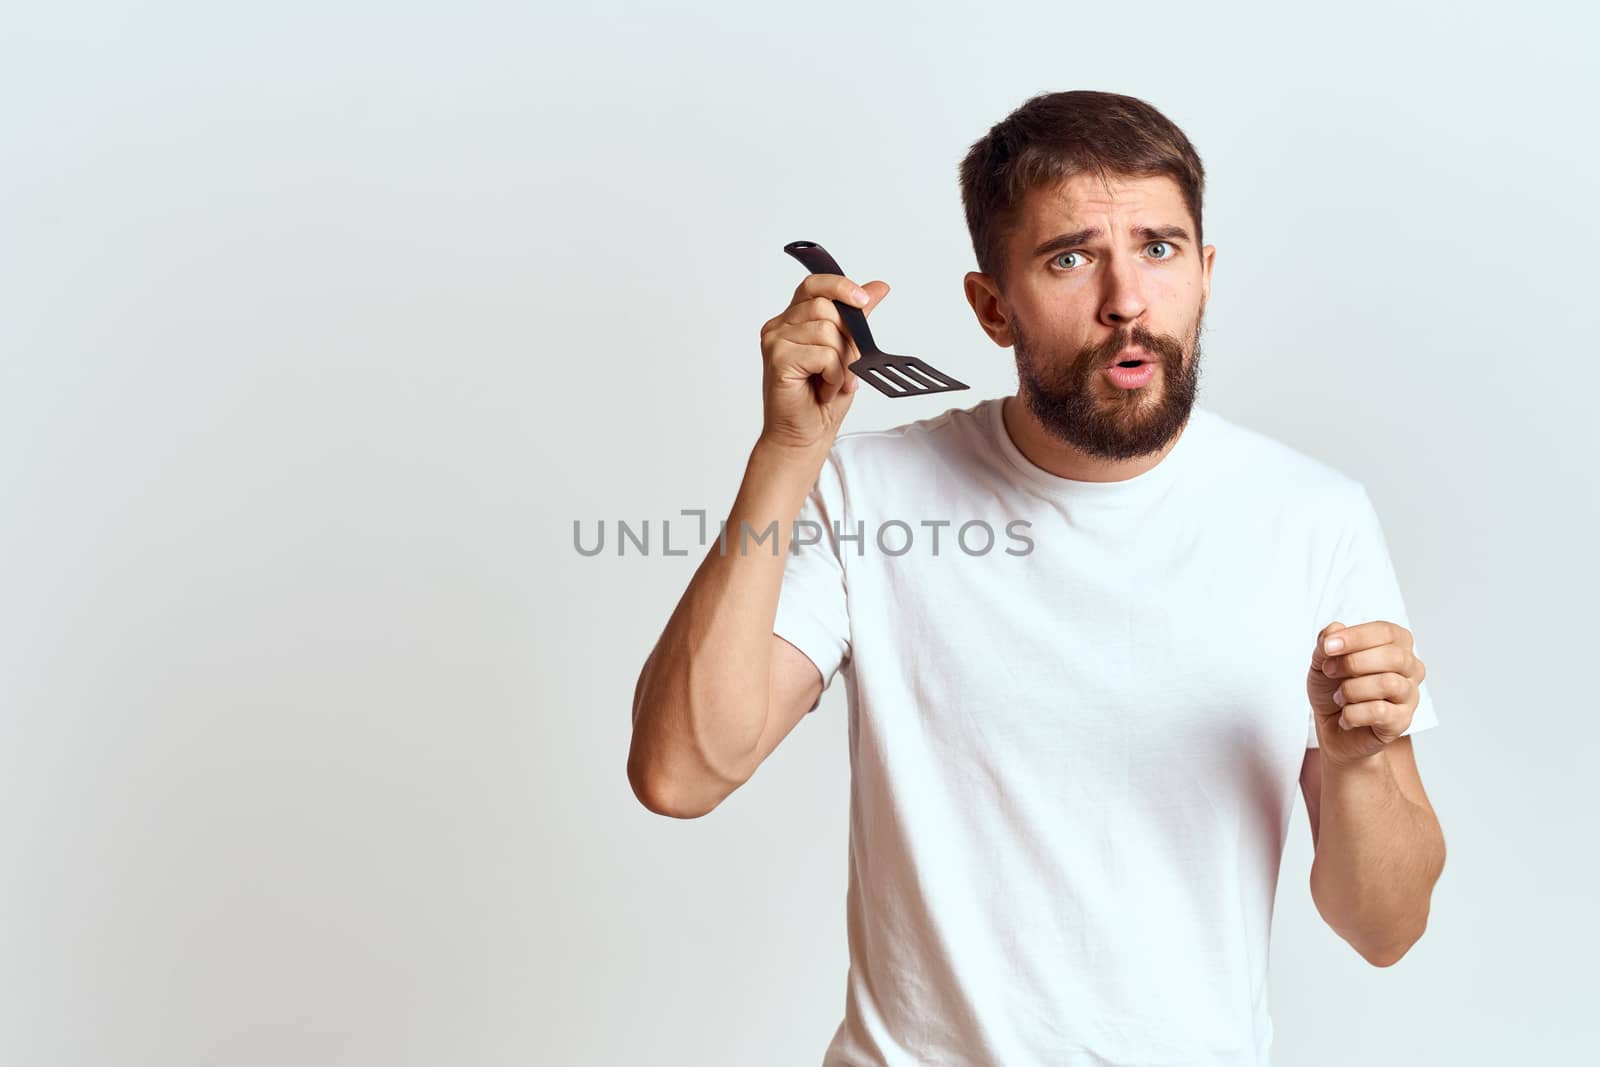 man with cooking shovel and white t-shirt close-up cropped view emotion gesturing with hand. High quality photo